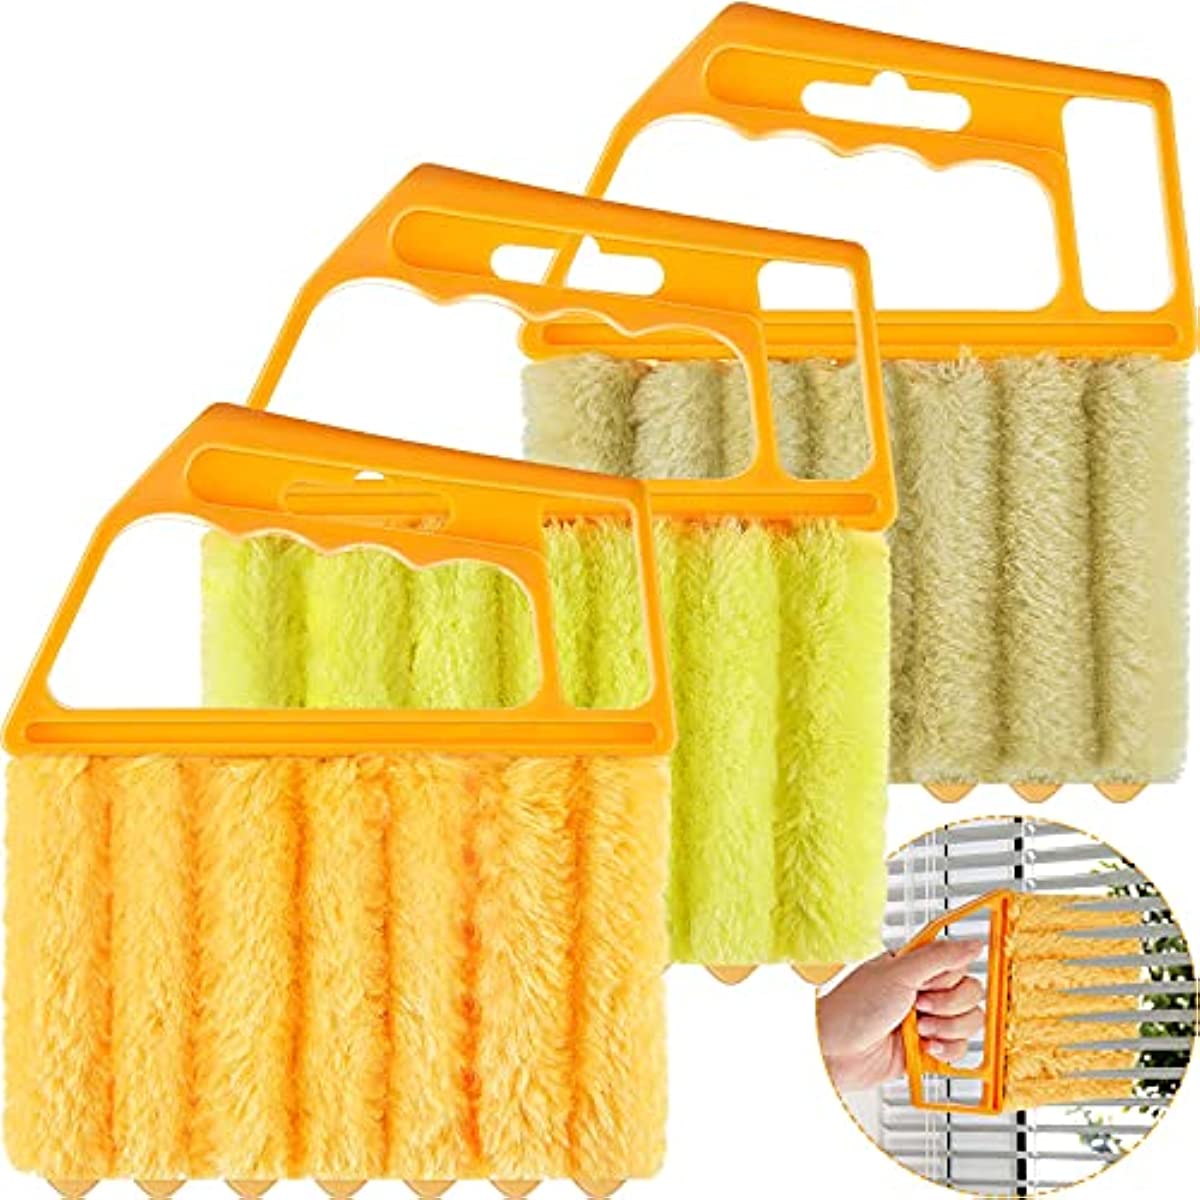 YELLOW Plastic Housekeeping Cleaning Tool